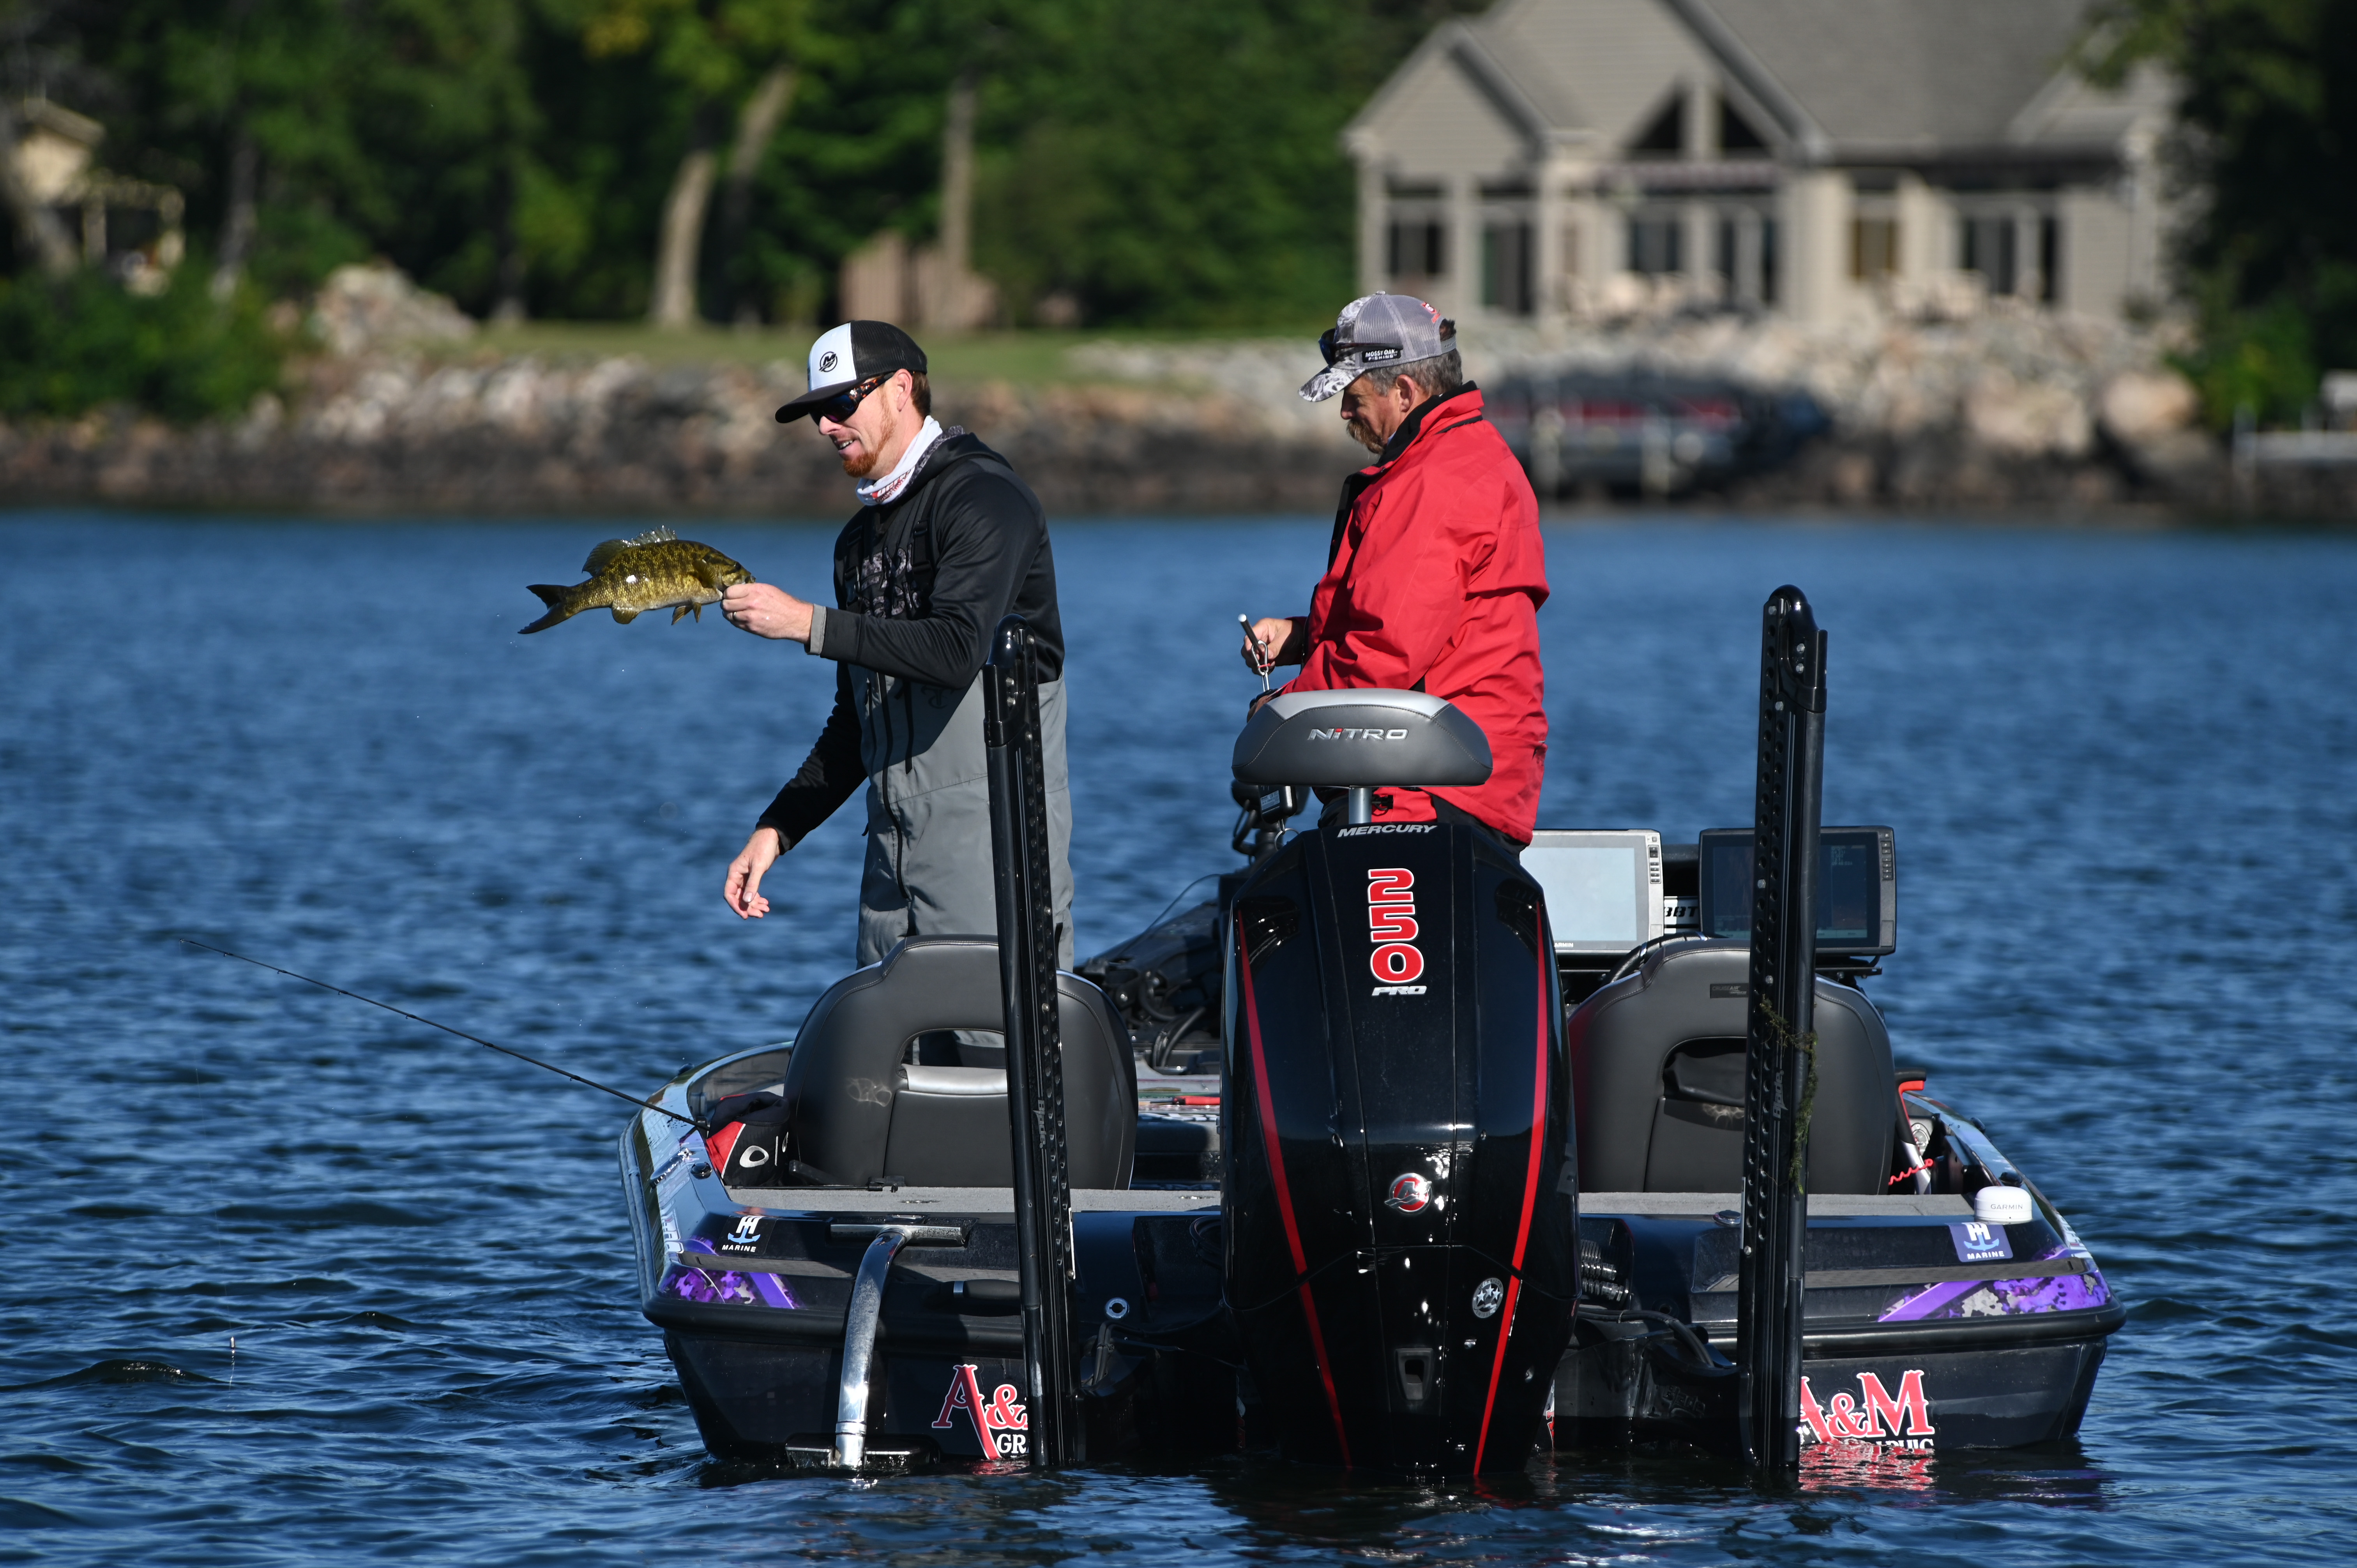 Josh Bertrand Leads Early After Day 1 of Bass Pro Tour Bally Bet